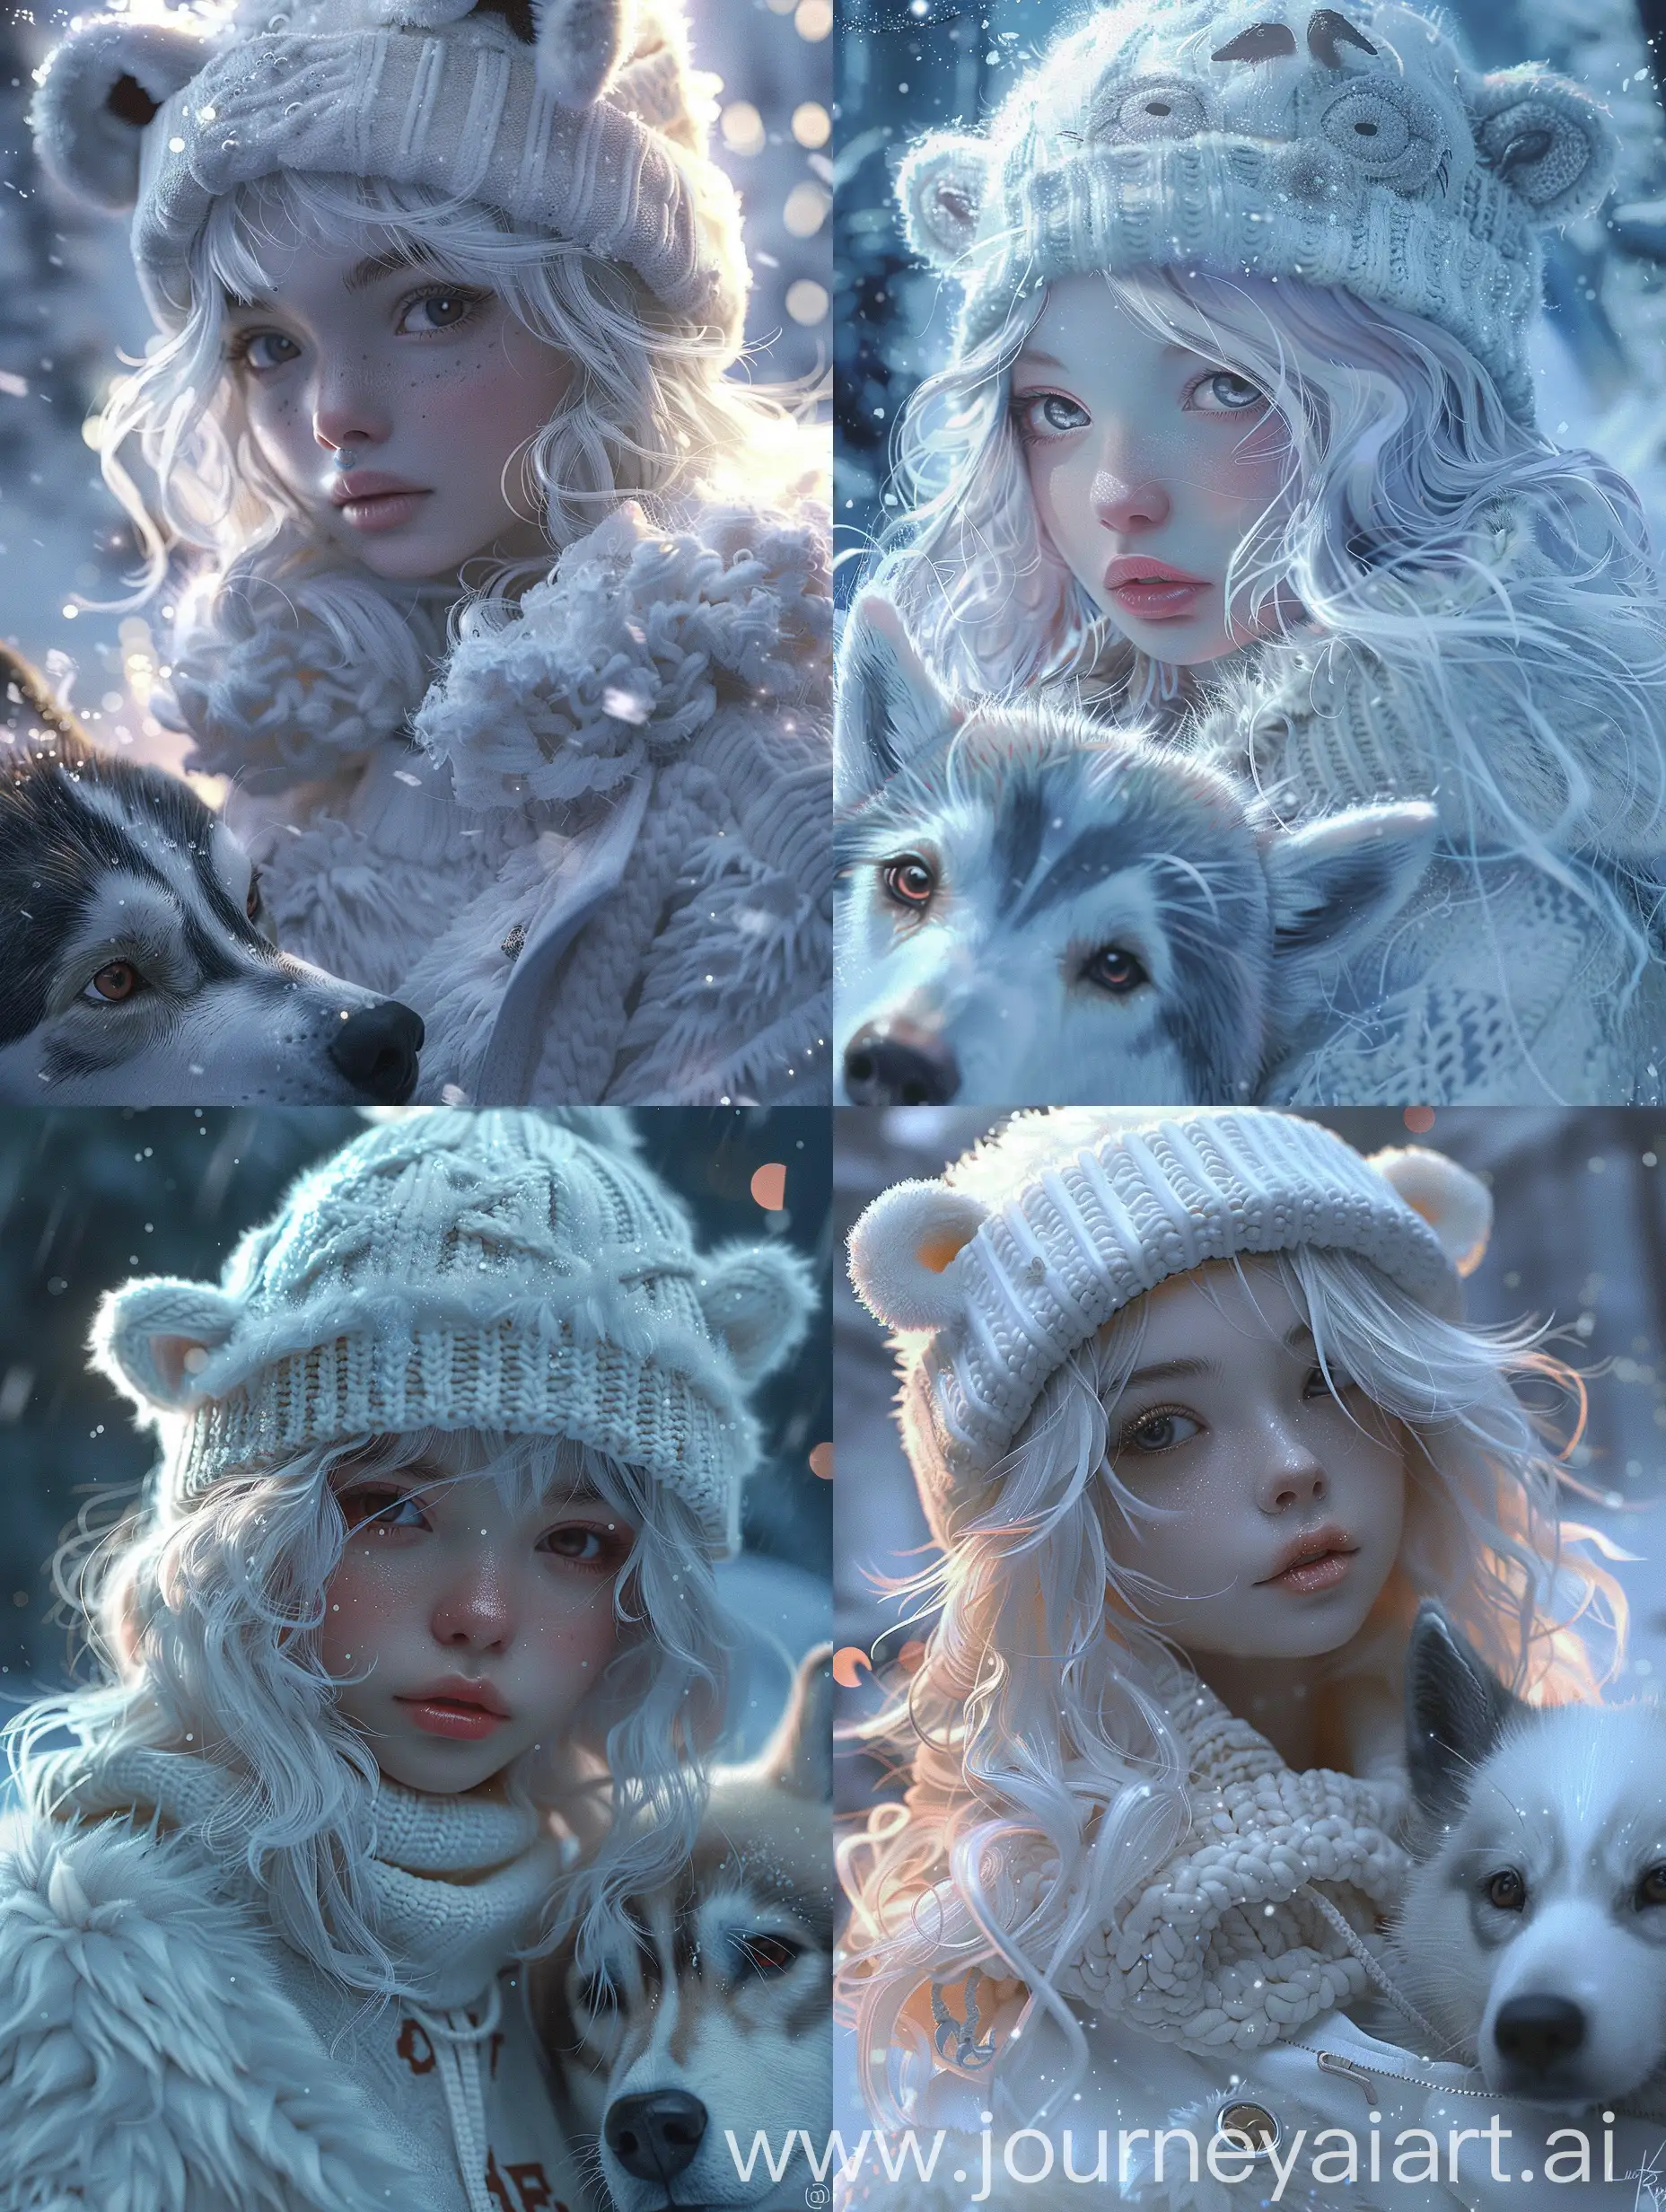 close up, a polar girl, white middle length thick wavy hair , porcelain skin, white beanie with animal ears, white fluffy sweater,  white jacket, with a husky,
winter night scene
Louis Royo's watercolor fantasy influenced by Konstantin Razumov's flair,
style by Tim Burton ,very detailed beautiful art, digital painting, very realistic
softly backlit, digital art 
filigree accents, boasting an extremely magical aesthetic, digital painting employing wlop, artgerm, and James Jean's techniques, 